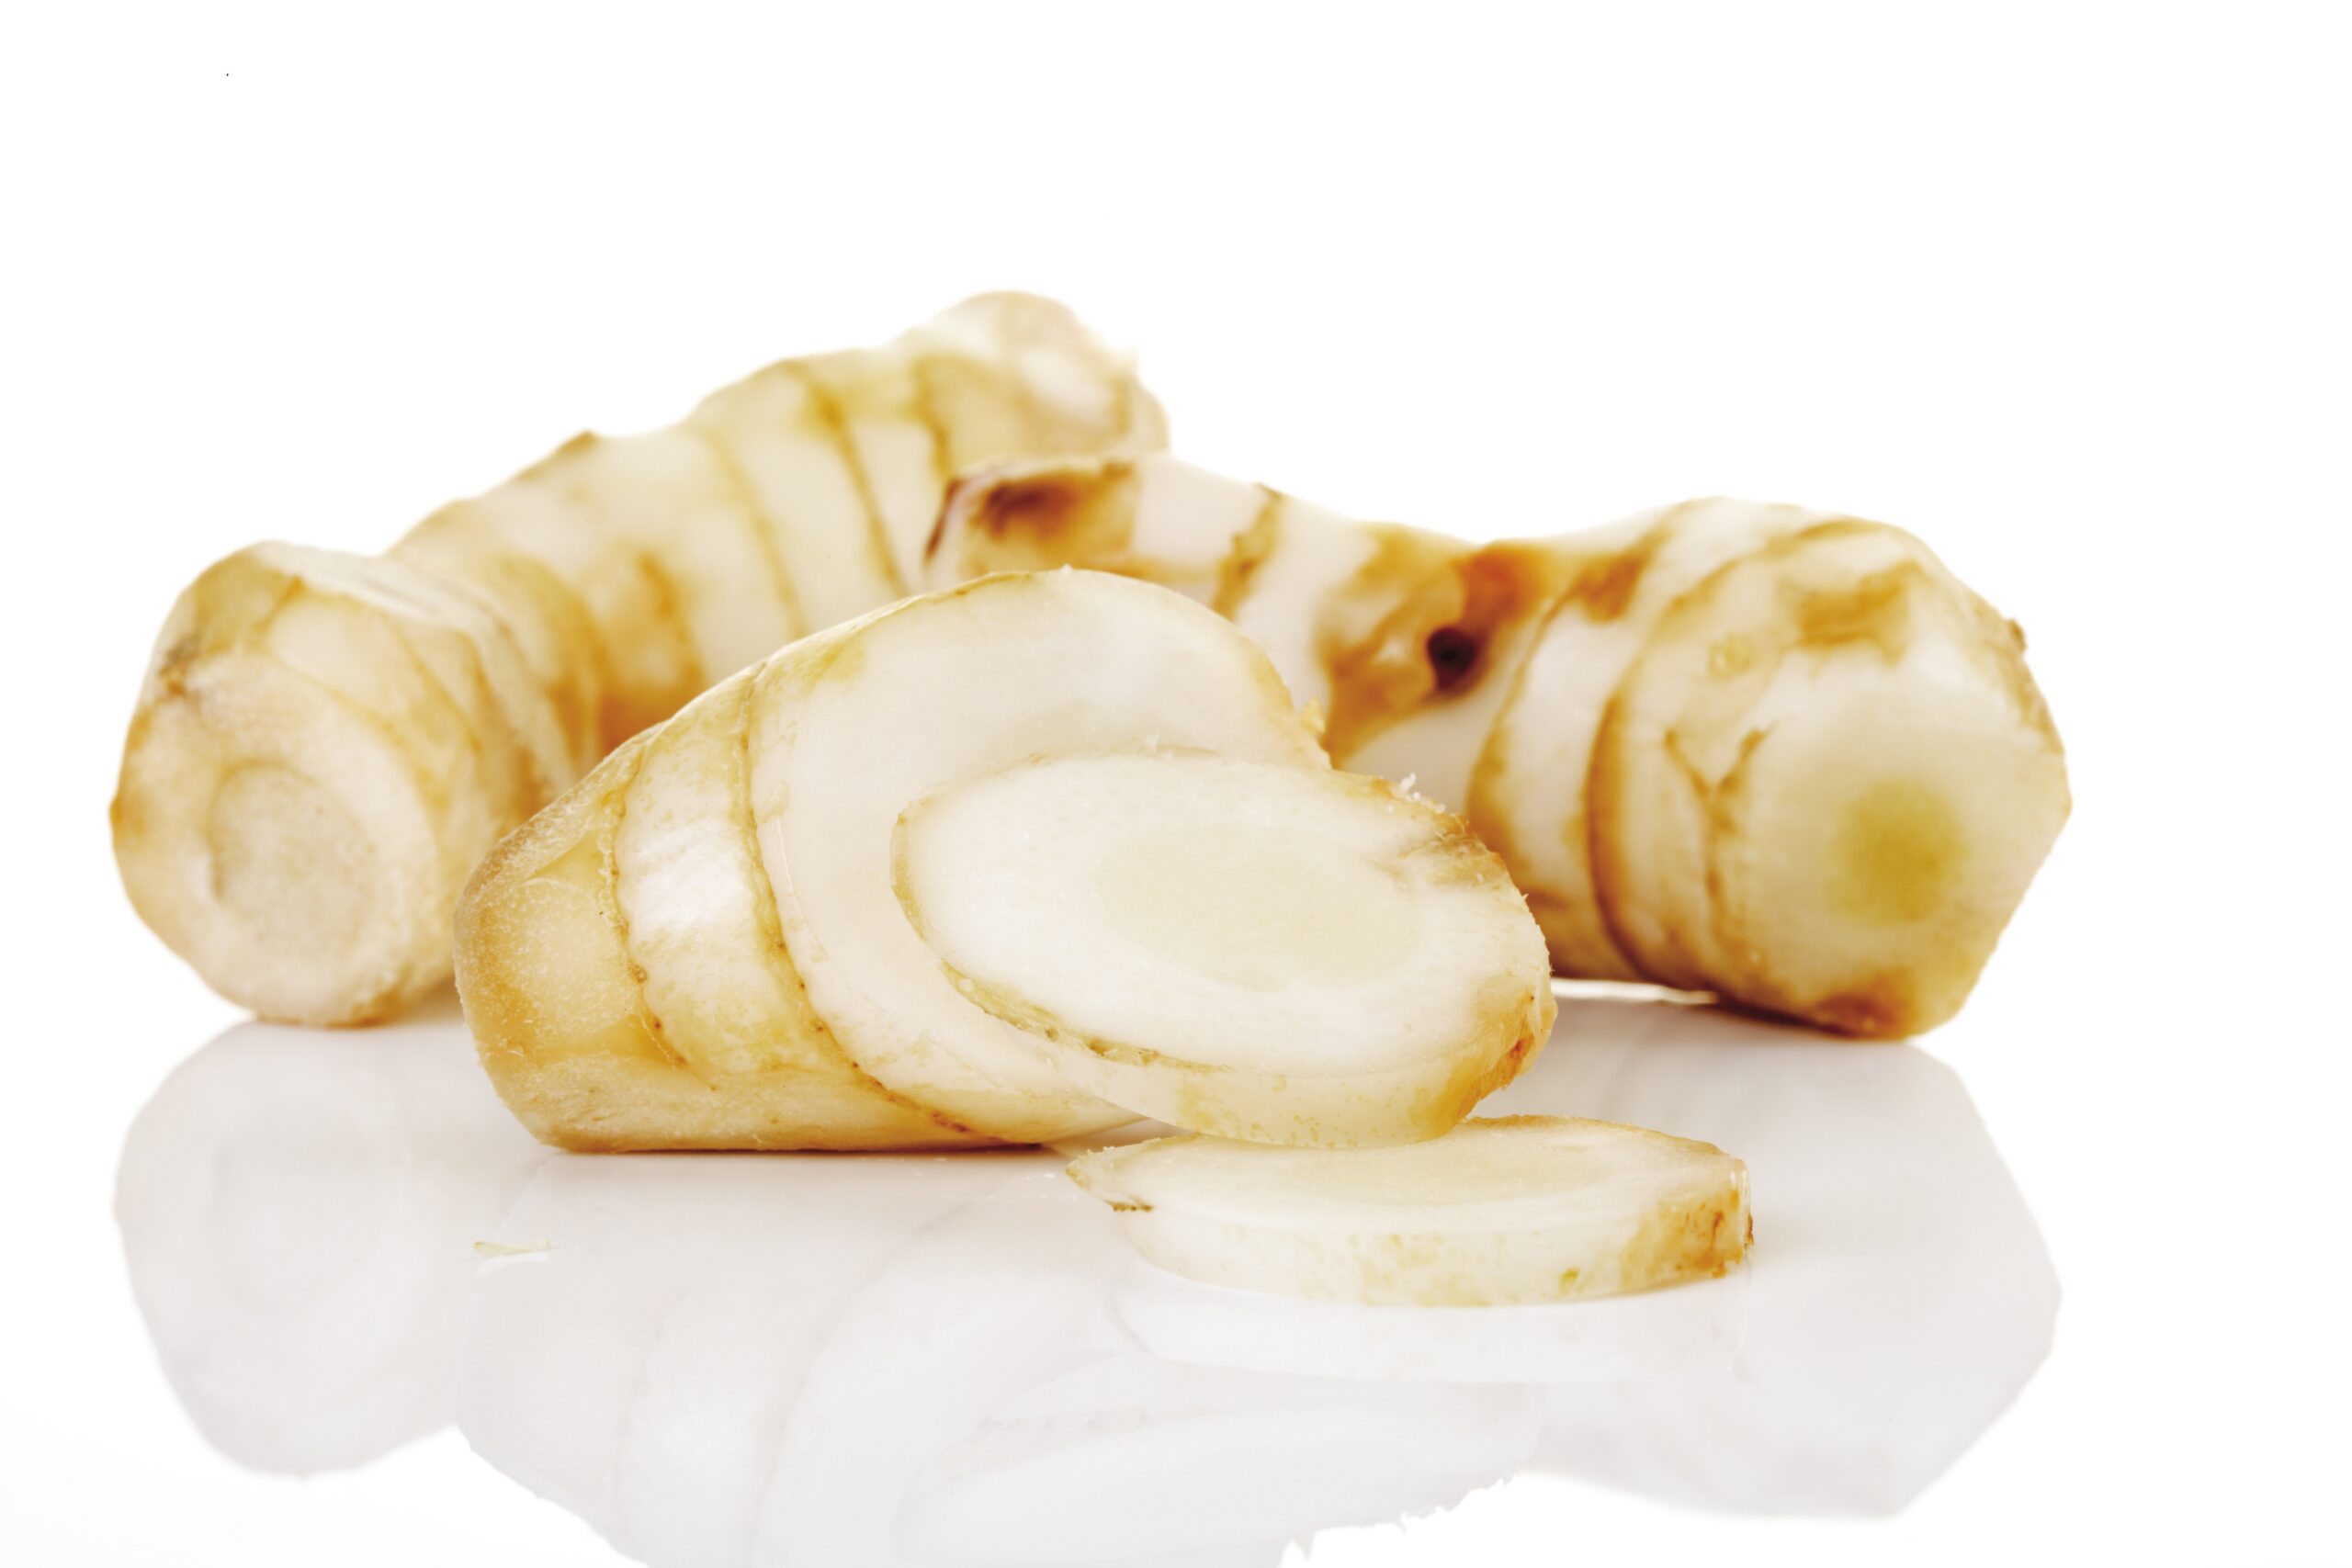 Medicinal plants: How galangal protects your health